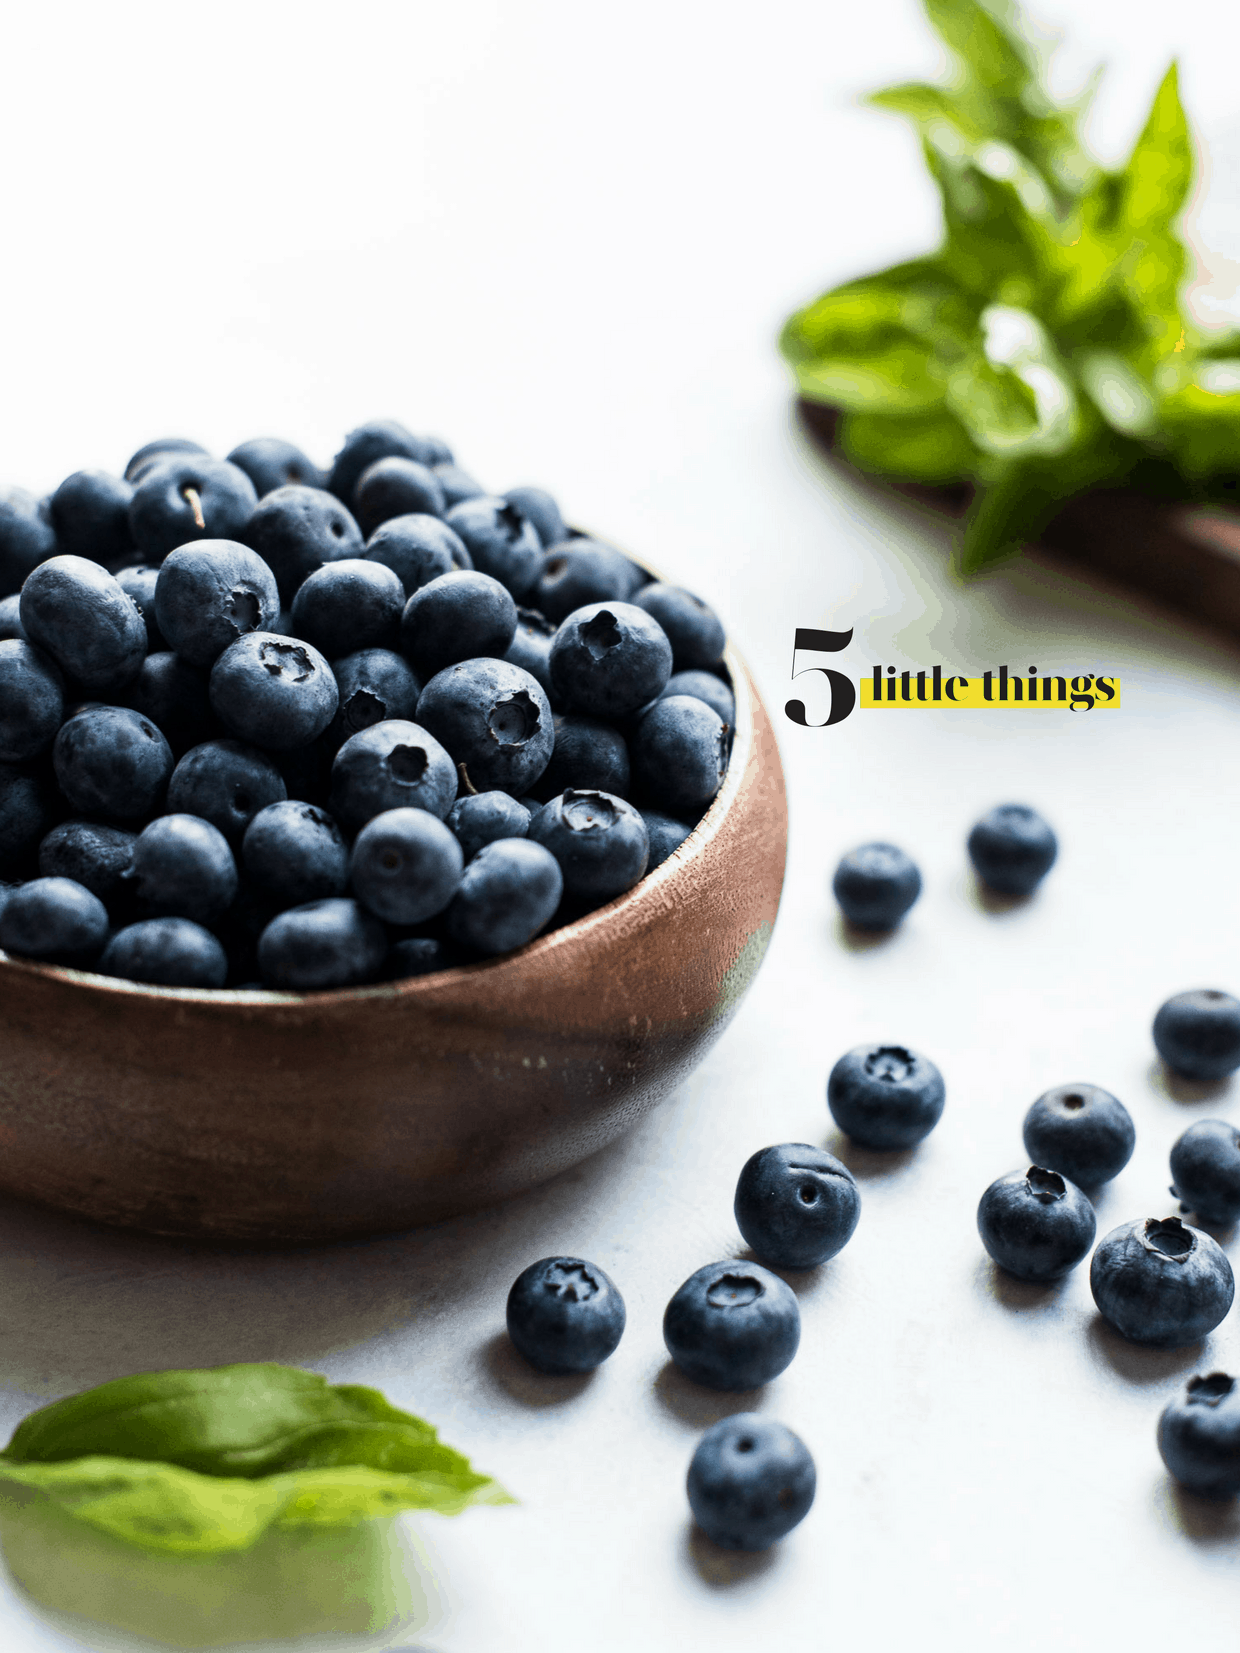 Wooden bowl of blueberries with blueberries on the counter.